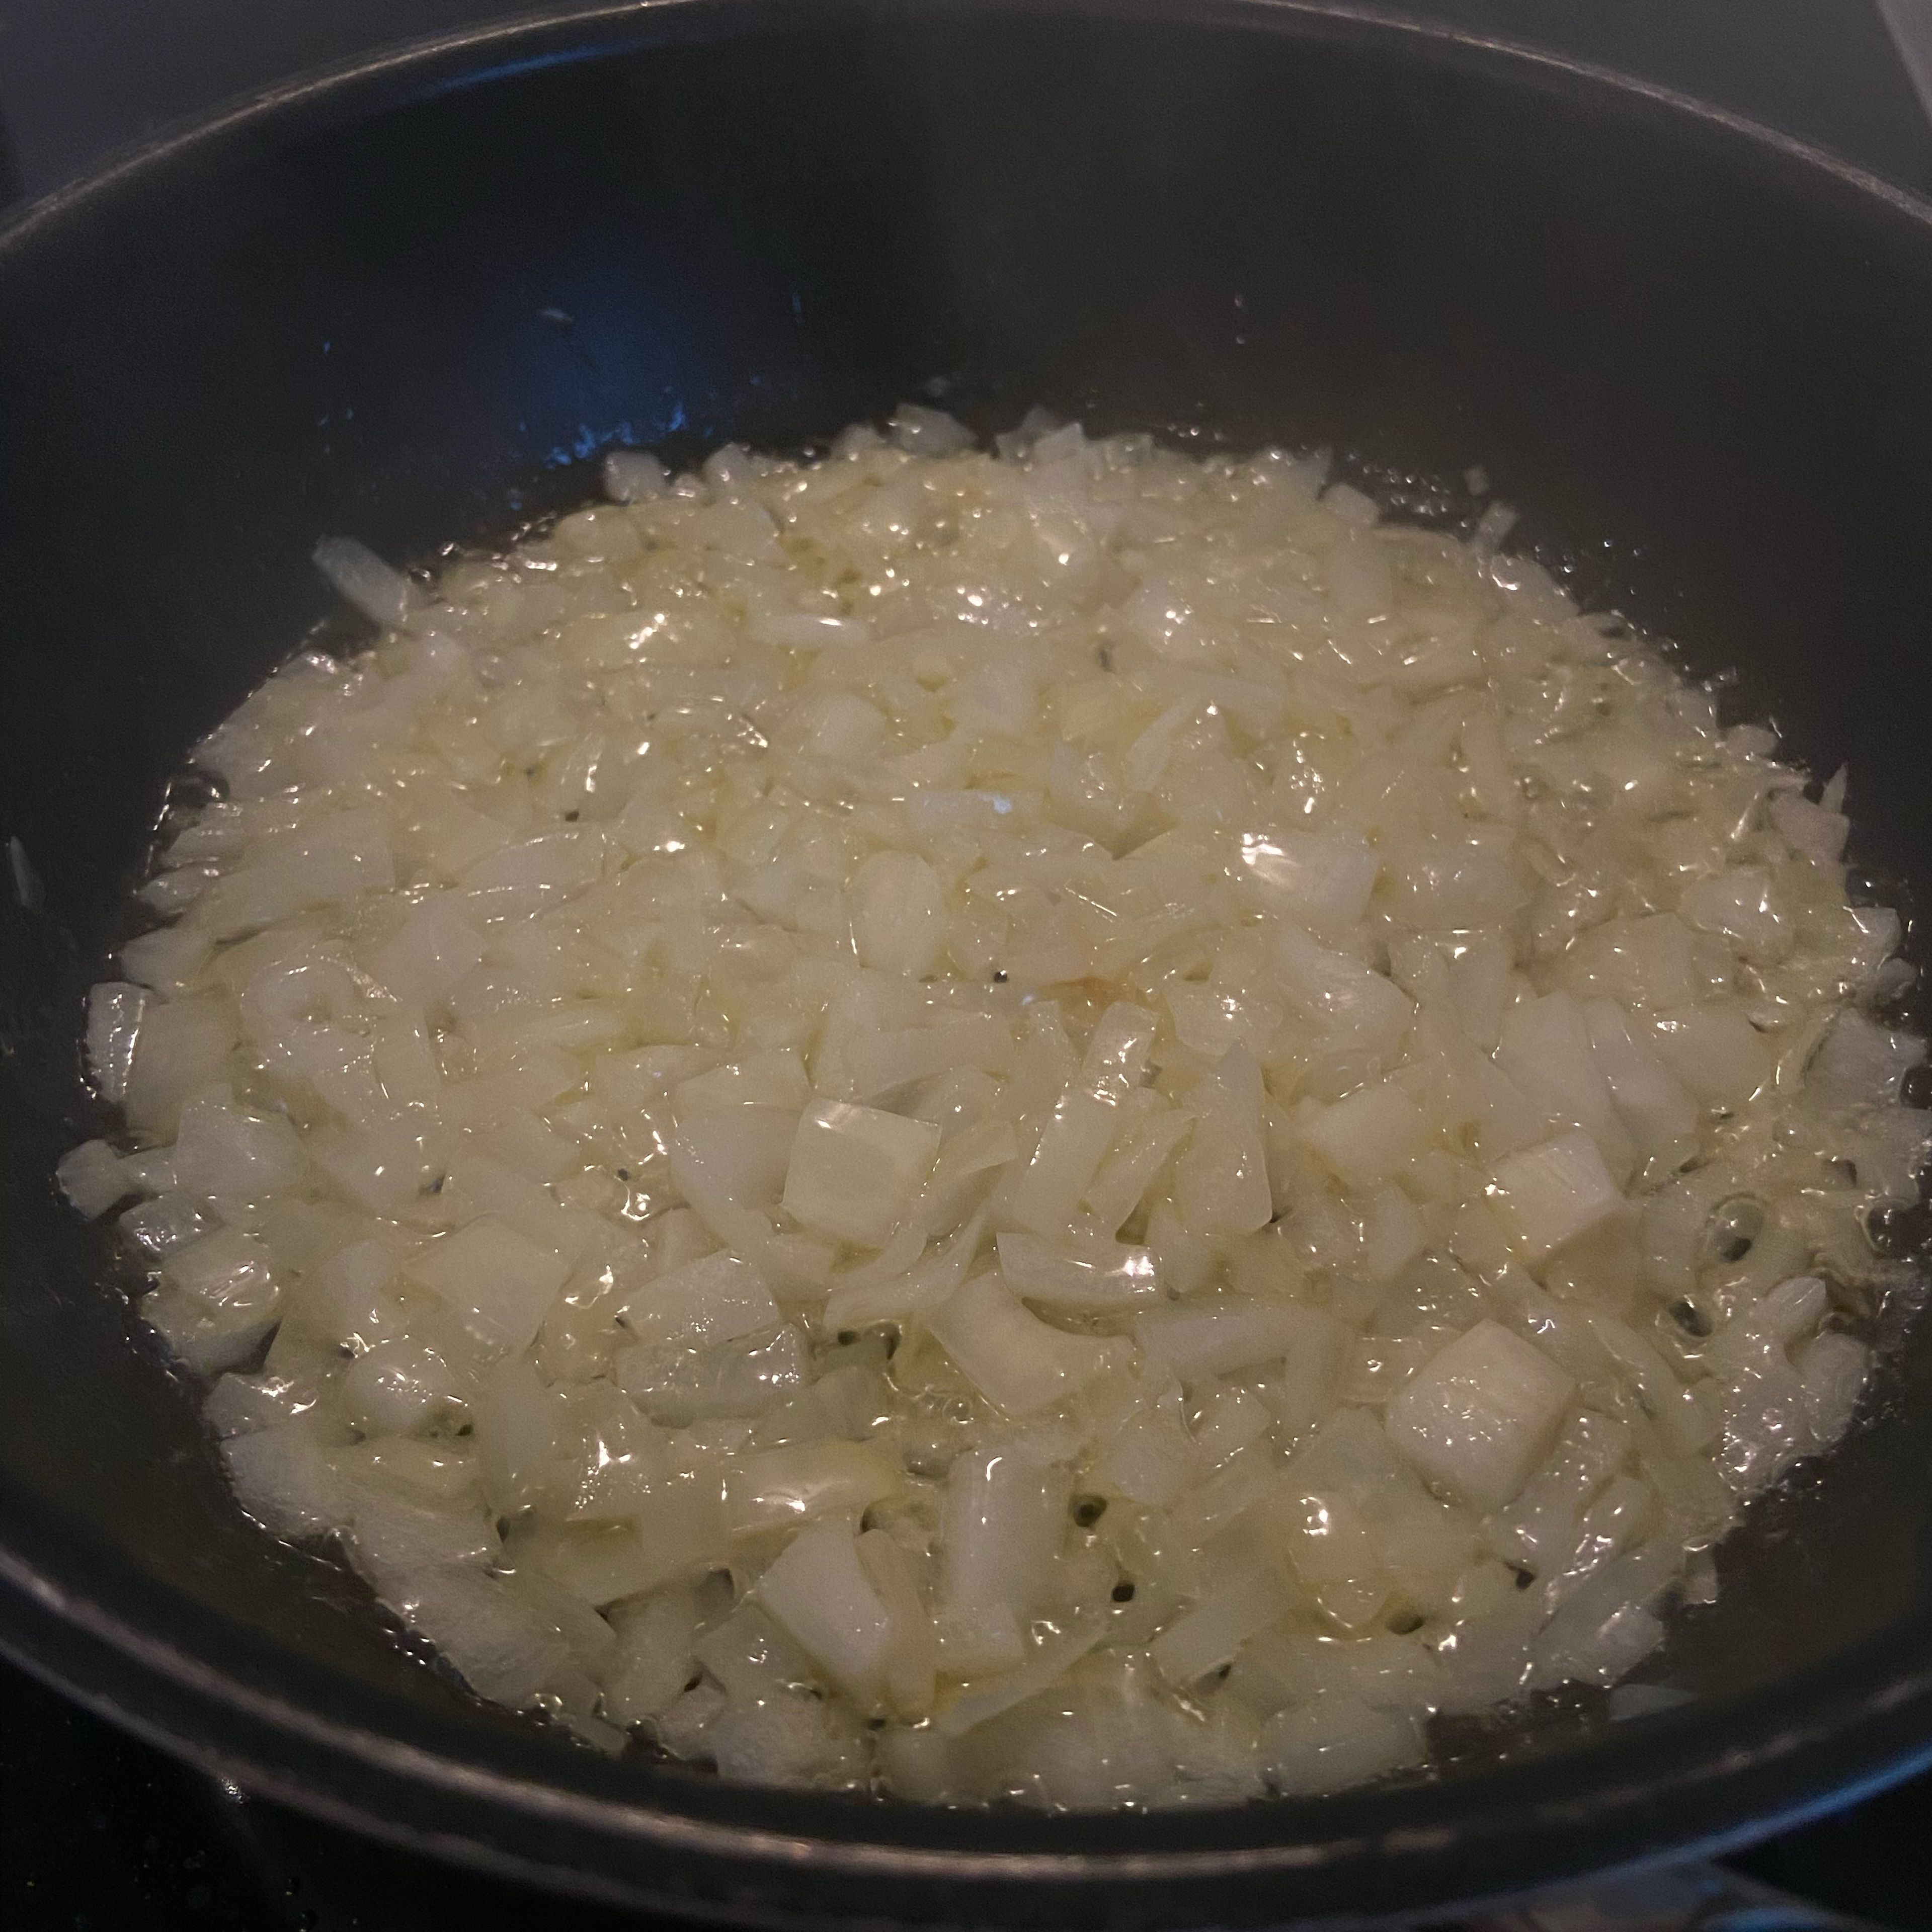 Cube the remaining onion and sauté in butter until translucent.